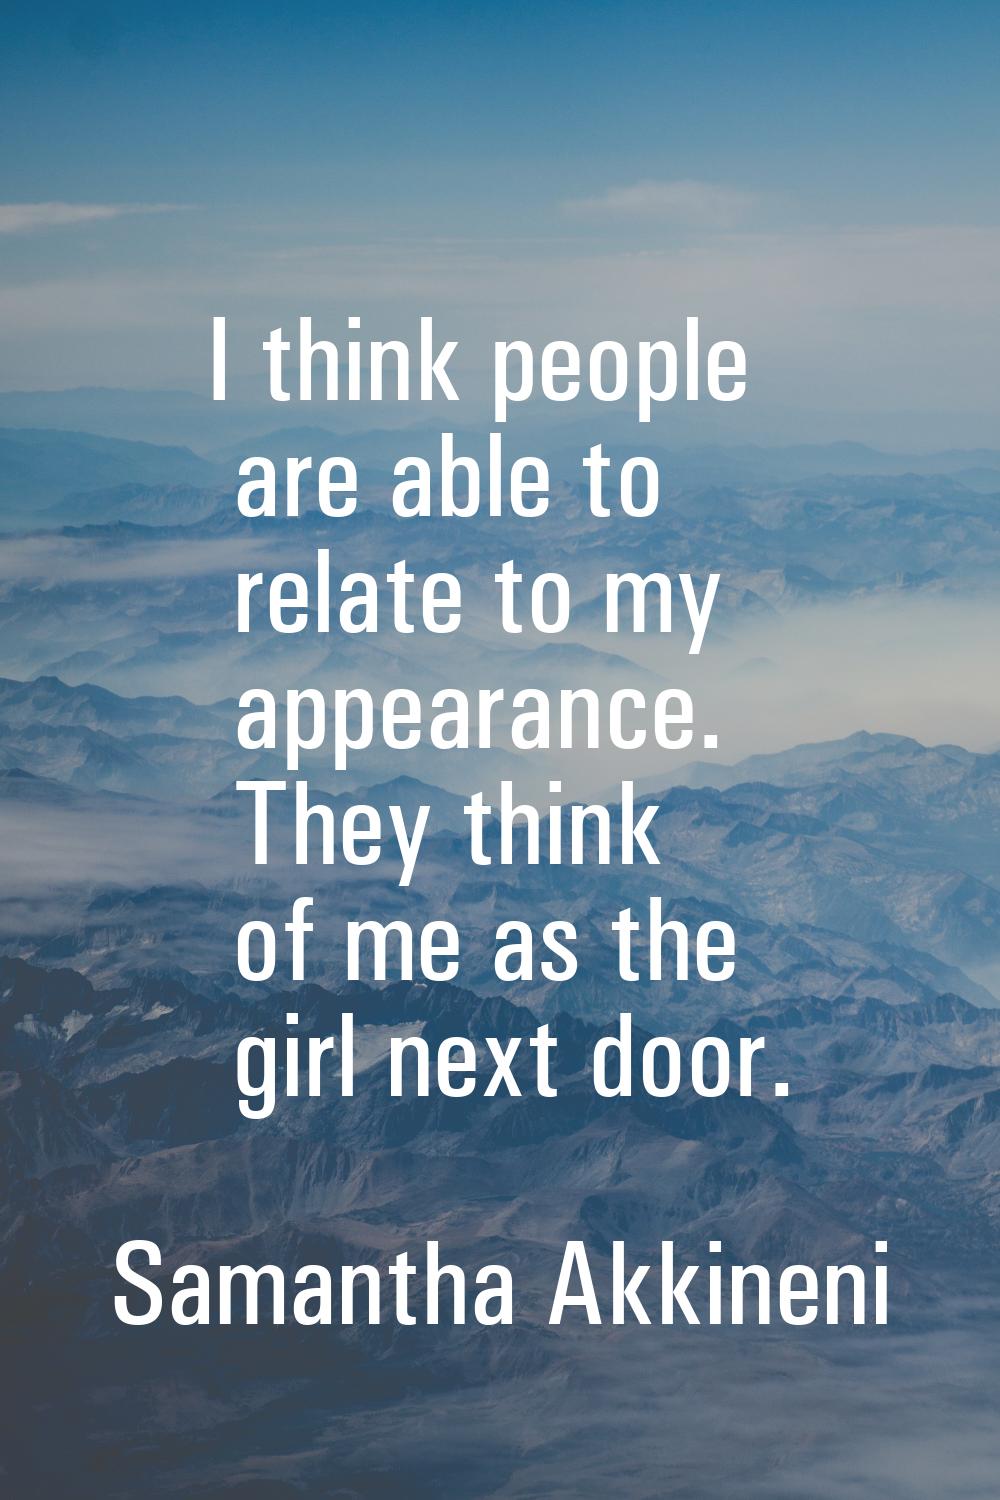 I think people are able to relate to my appearance. They think of me as the girl next door.